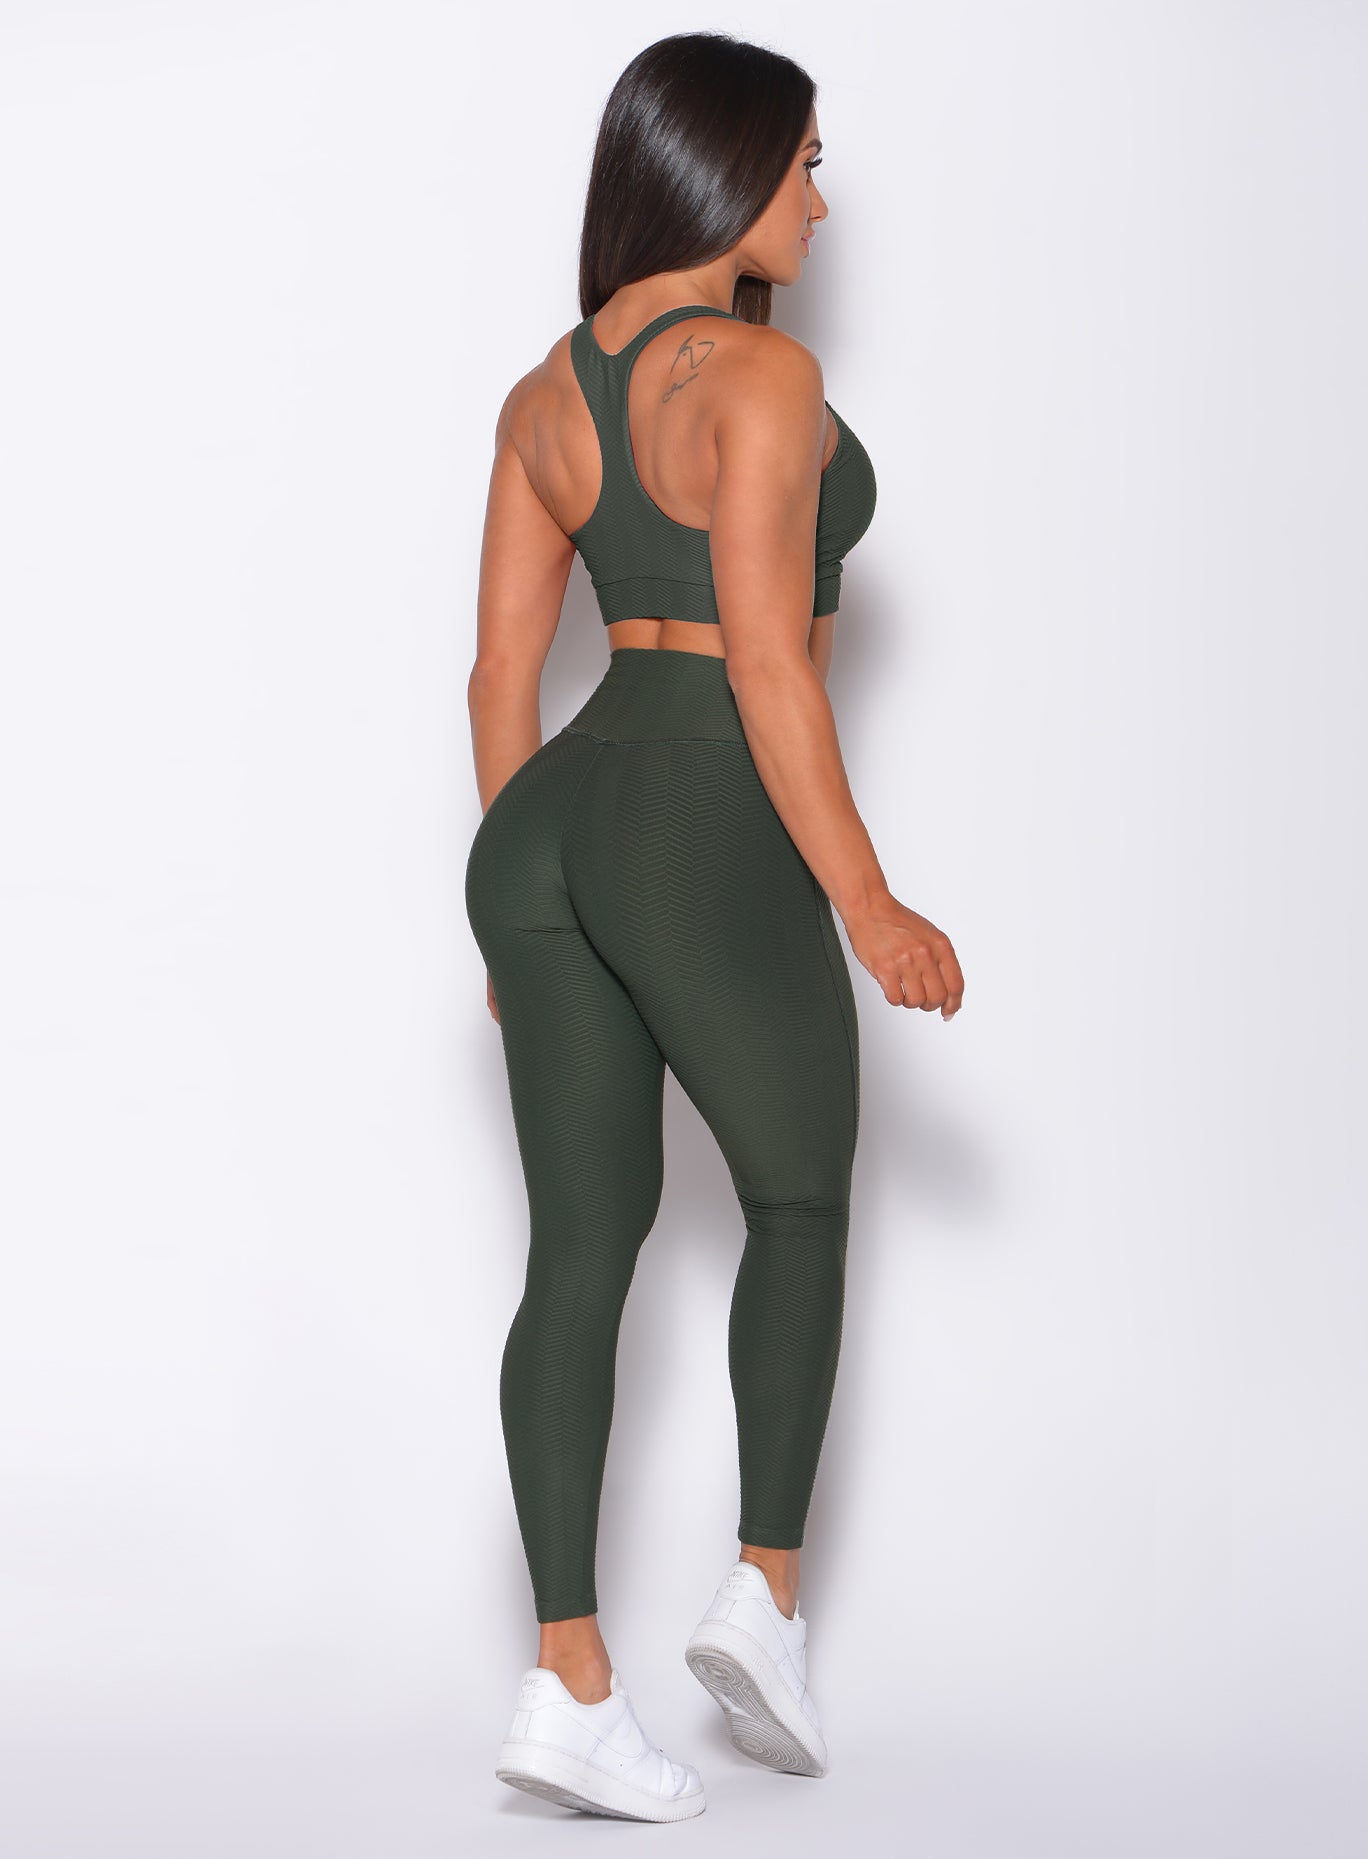 Back profile view of a model in our Chevron Leggings in lucky green color and matching bra